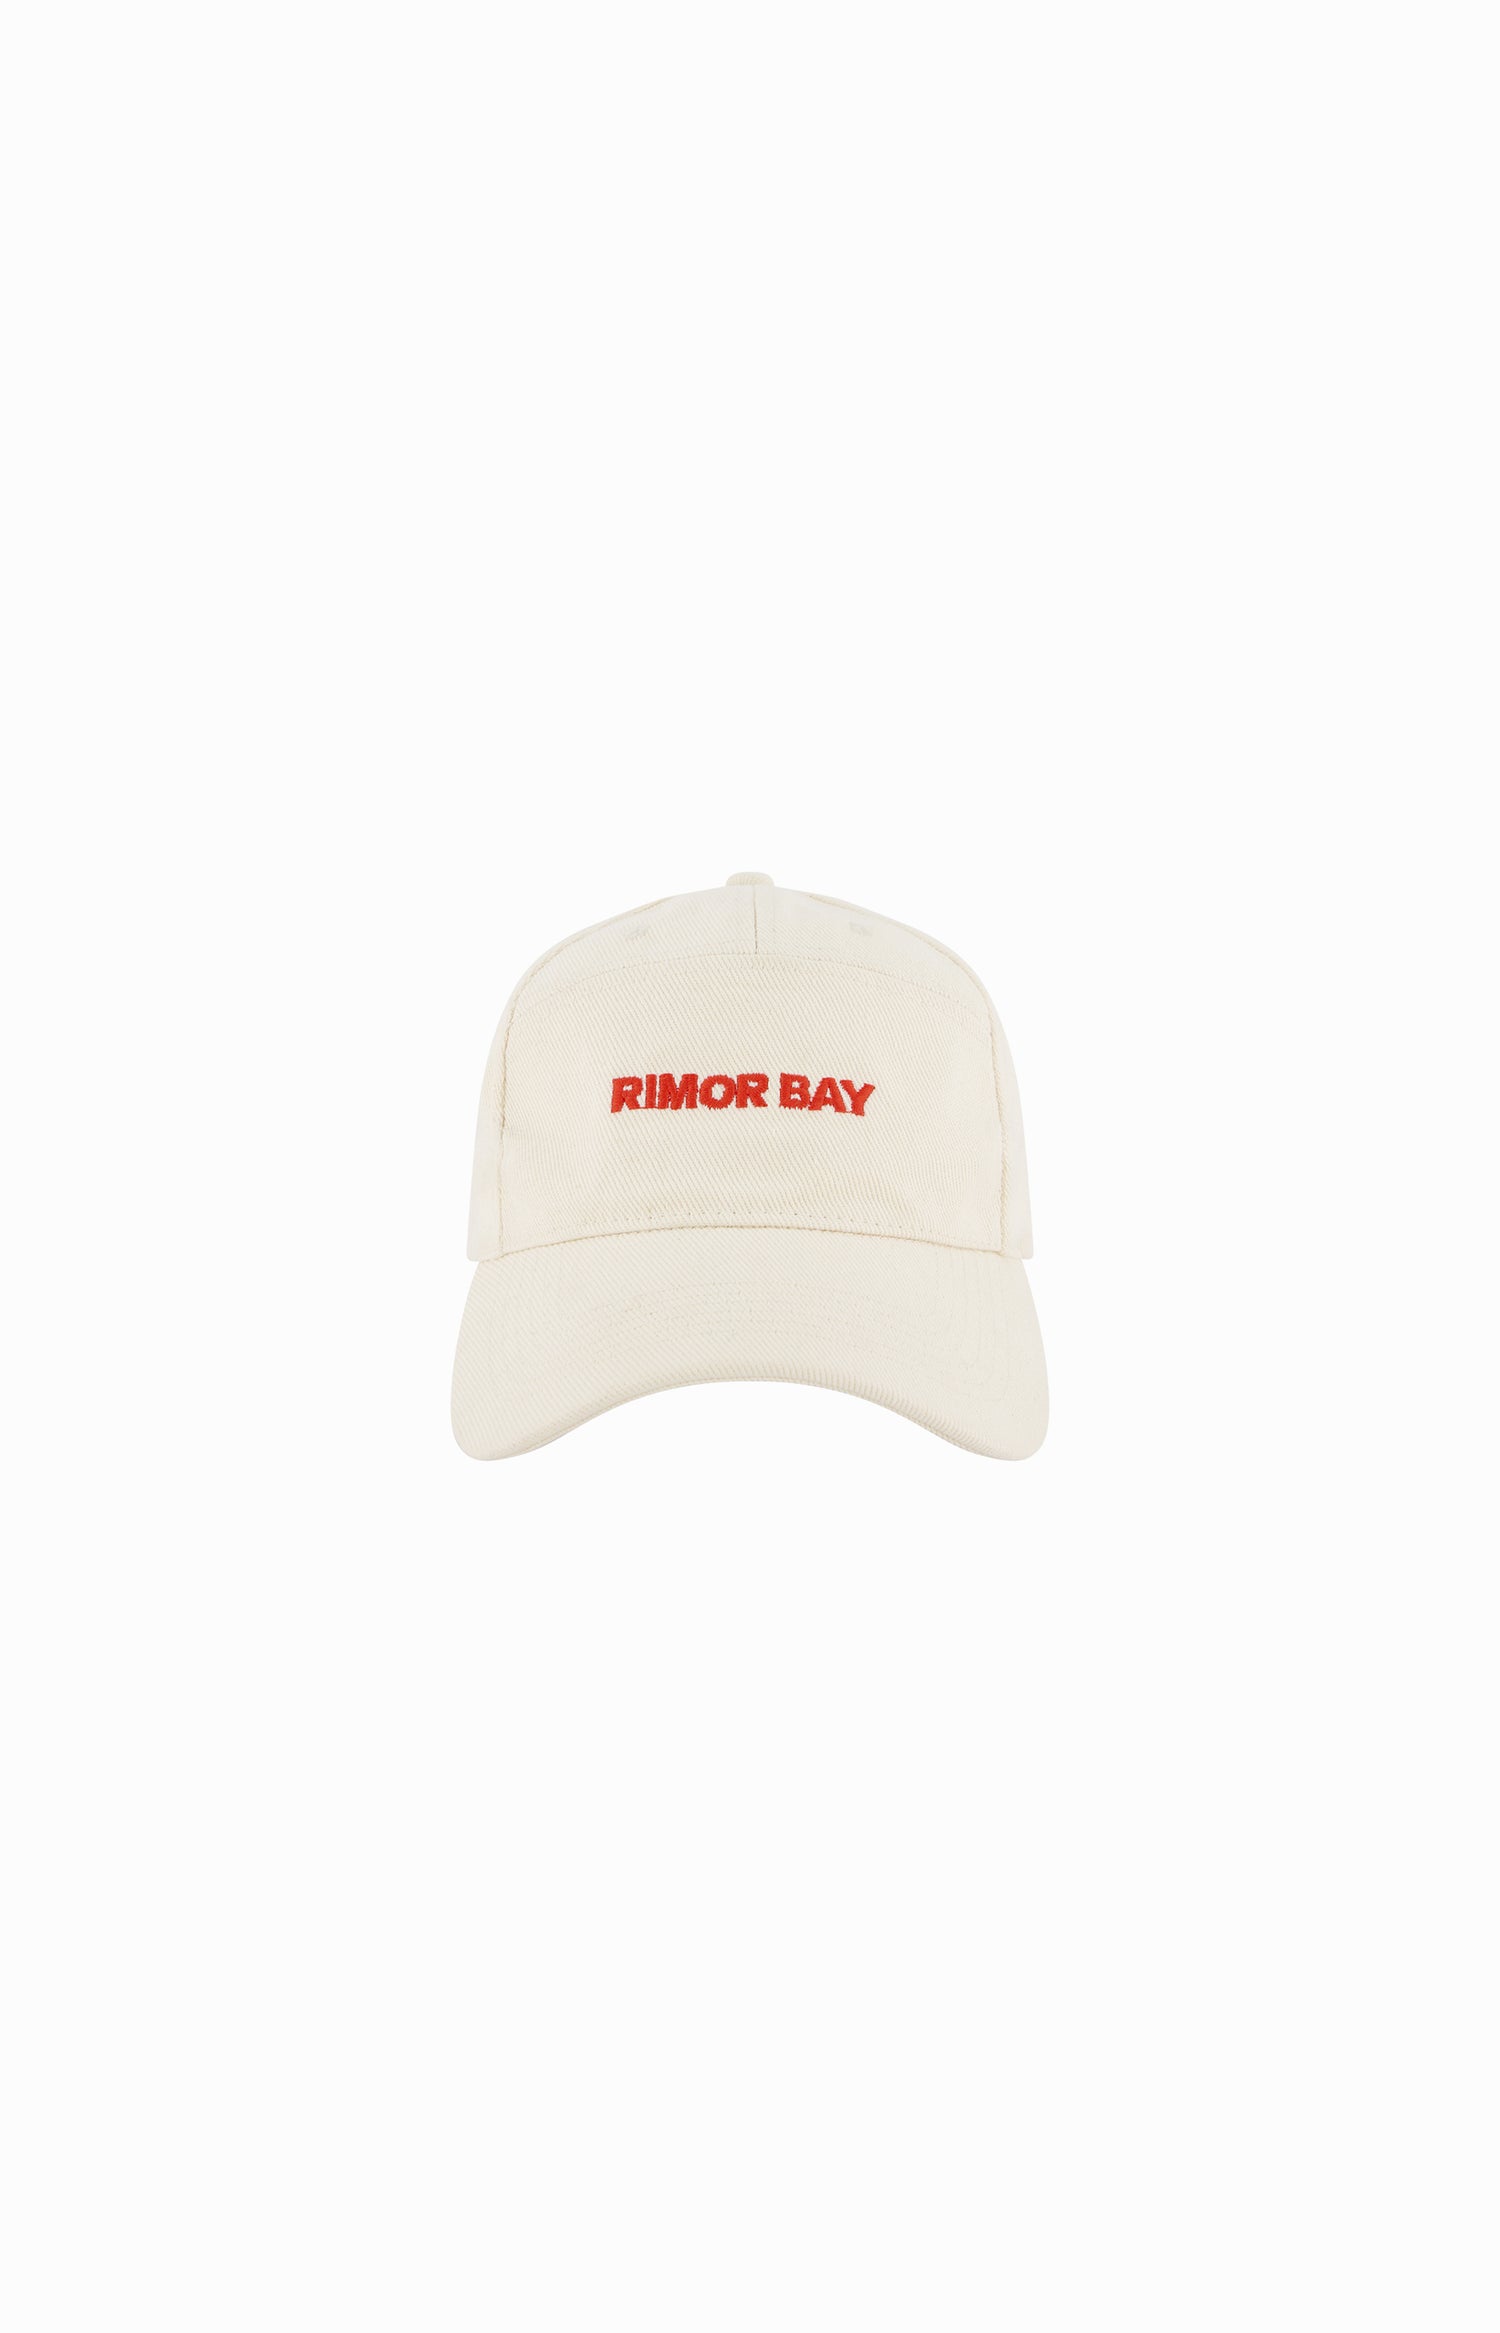  clear cut of beige 7 panel cap with logo on front